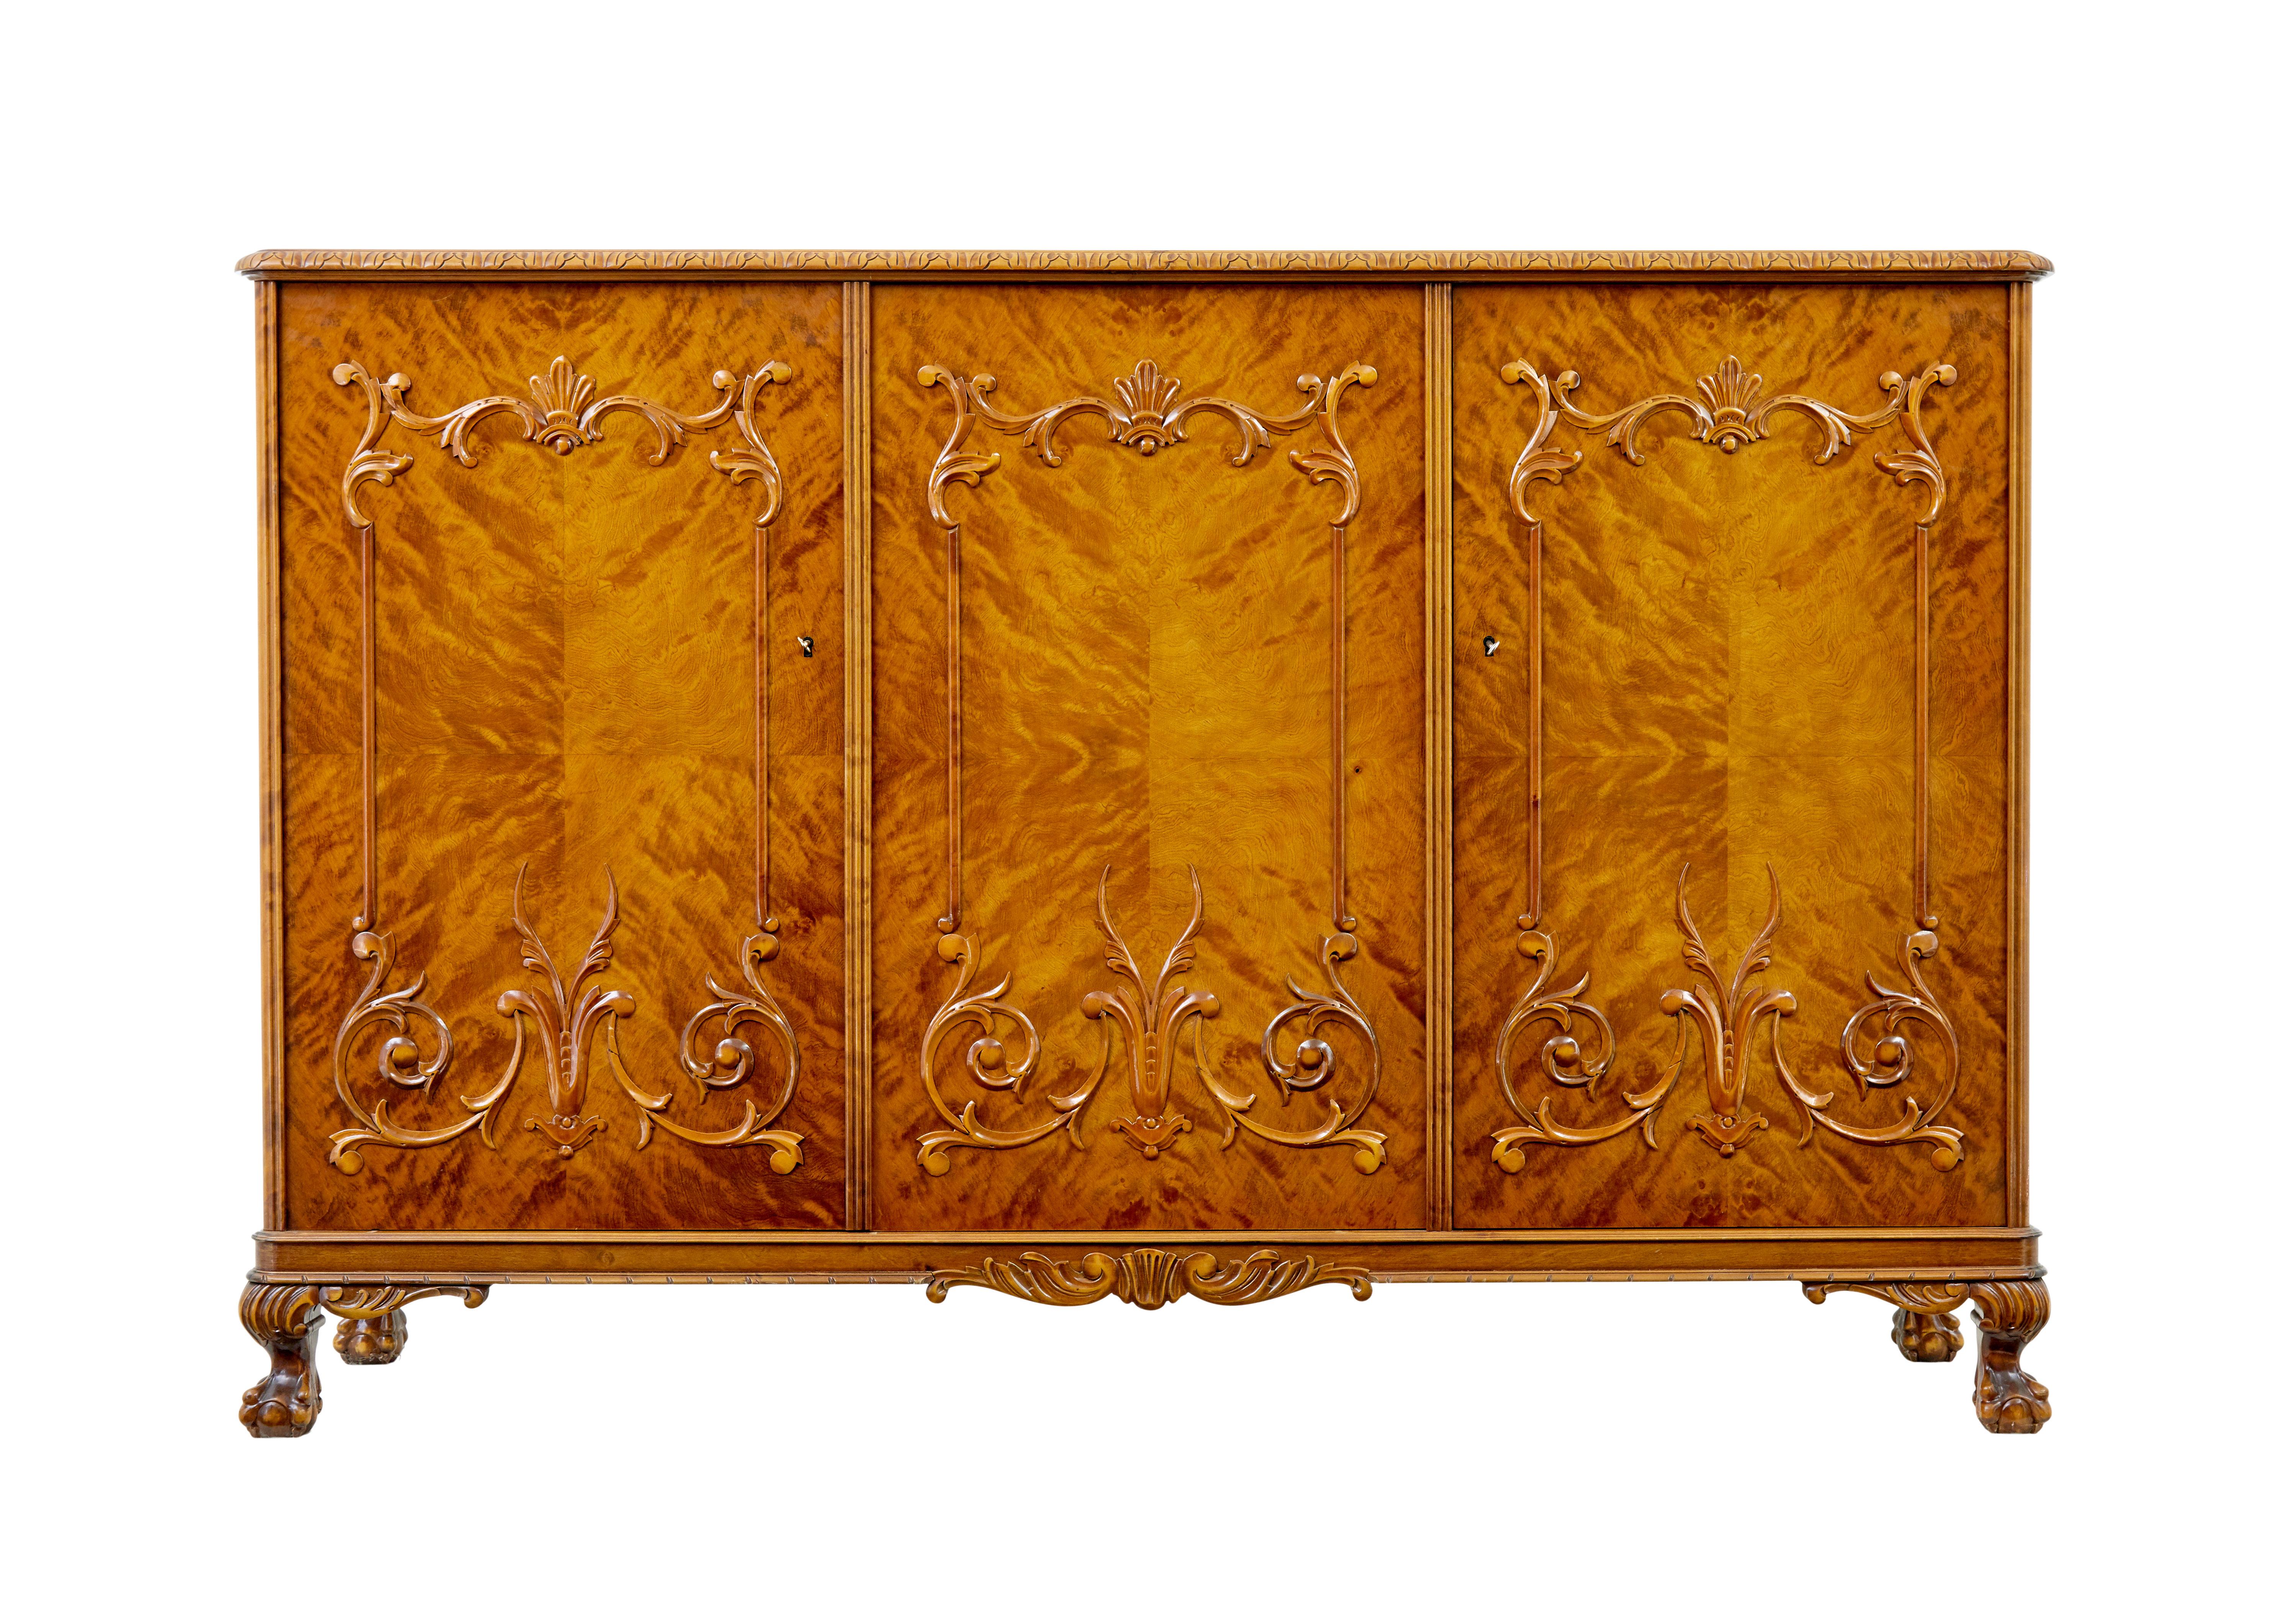 Good quality Scandinavian birch sideboard in the rococo taste circa 1940.

Comprising of a single door and a double door compartment.  Top surface with decorative carved edge leads to the quarter veneered doors with applied swag mouldings.

Single